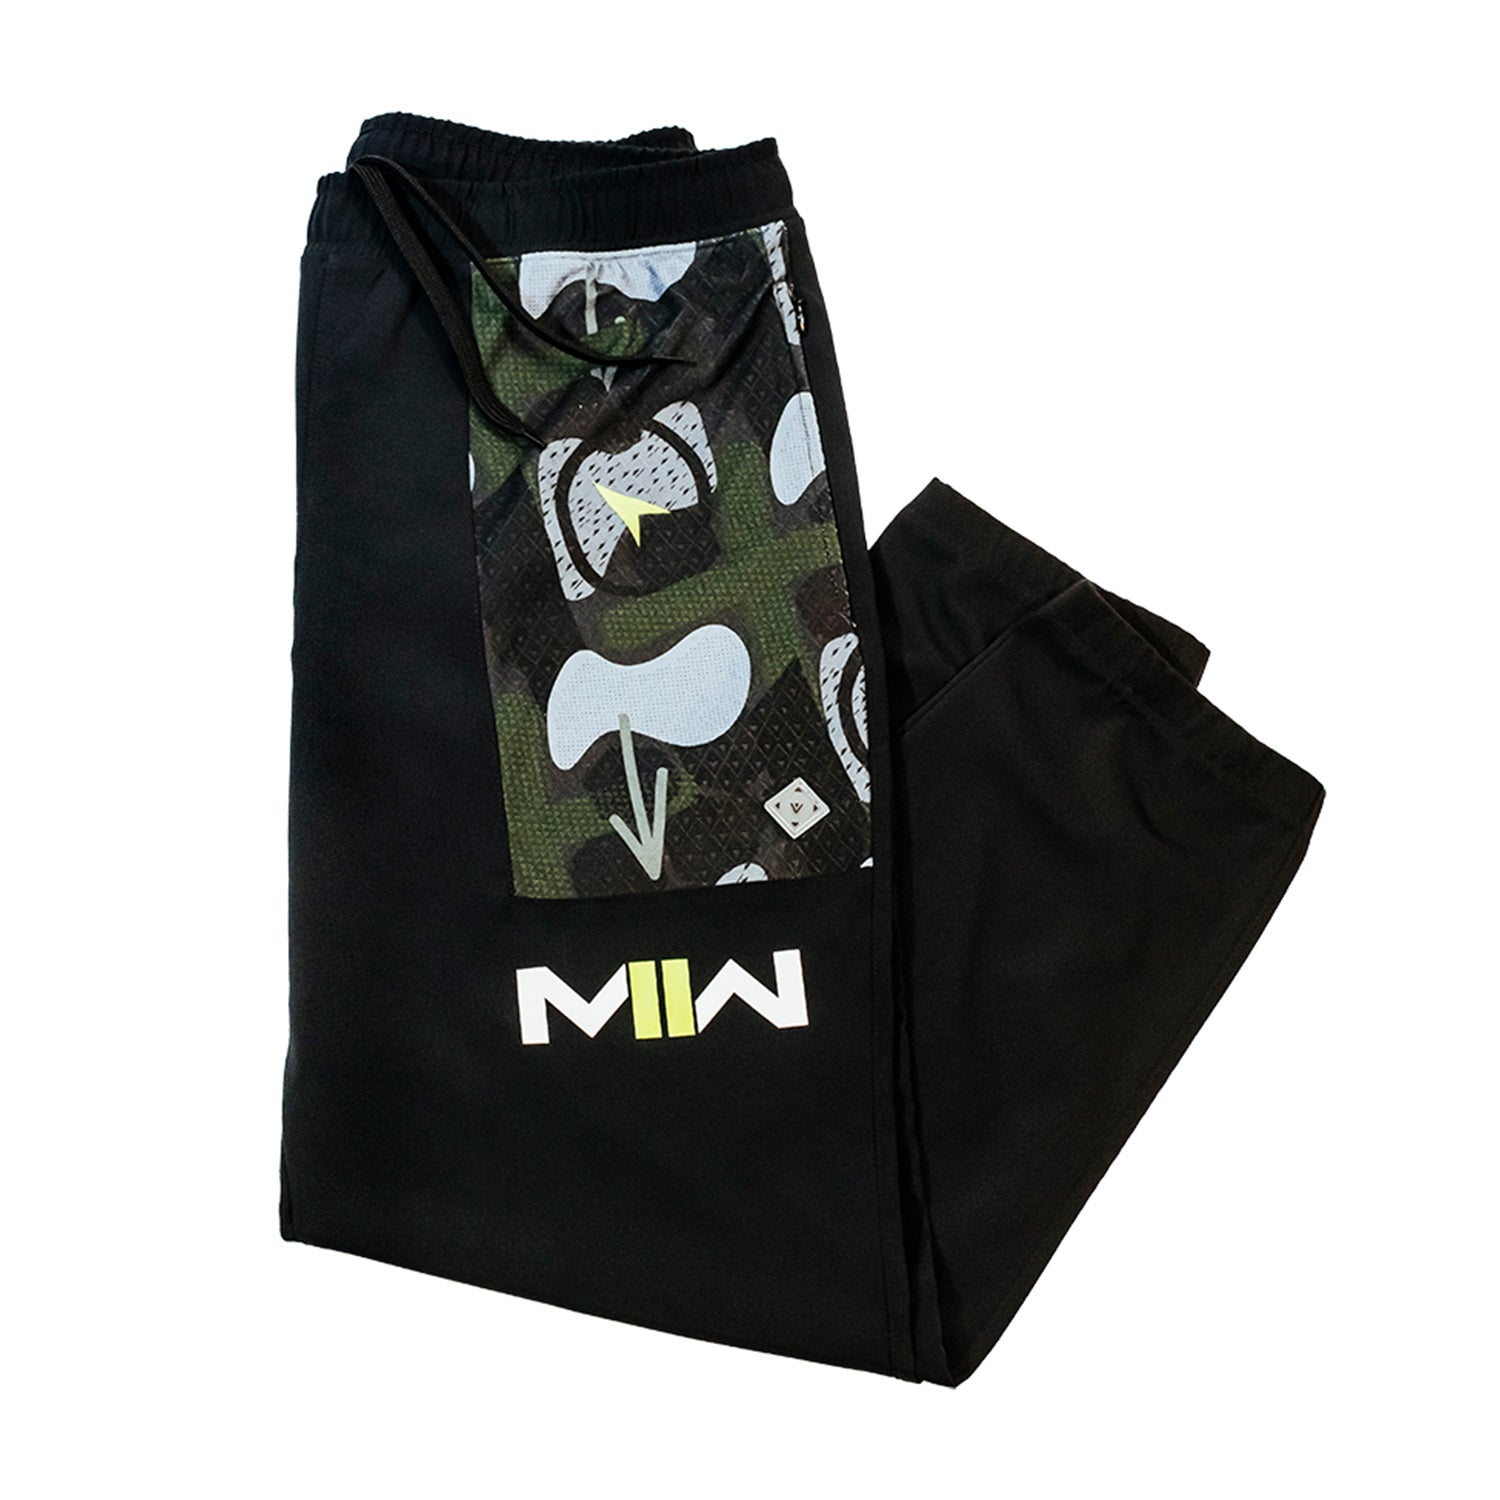 Call of Duty POINT3 MWII Black Joggers - Front View